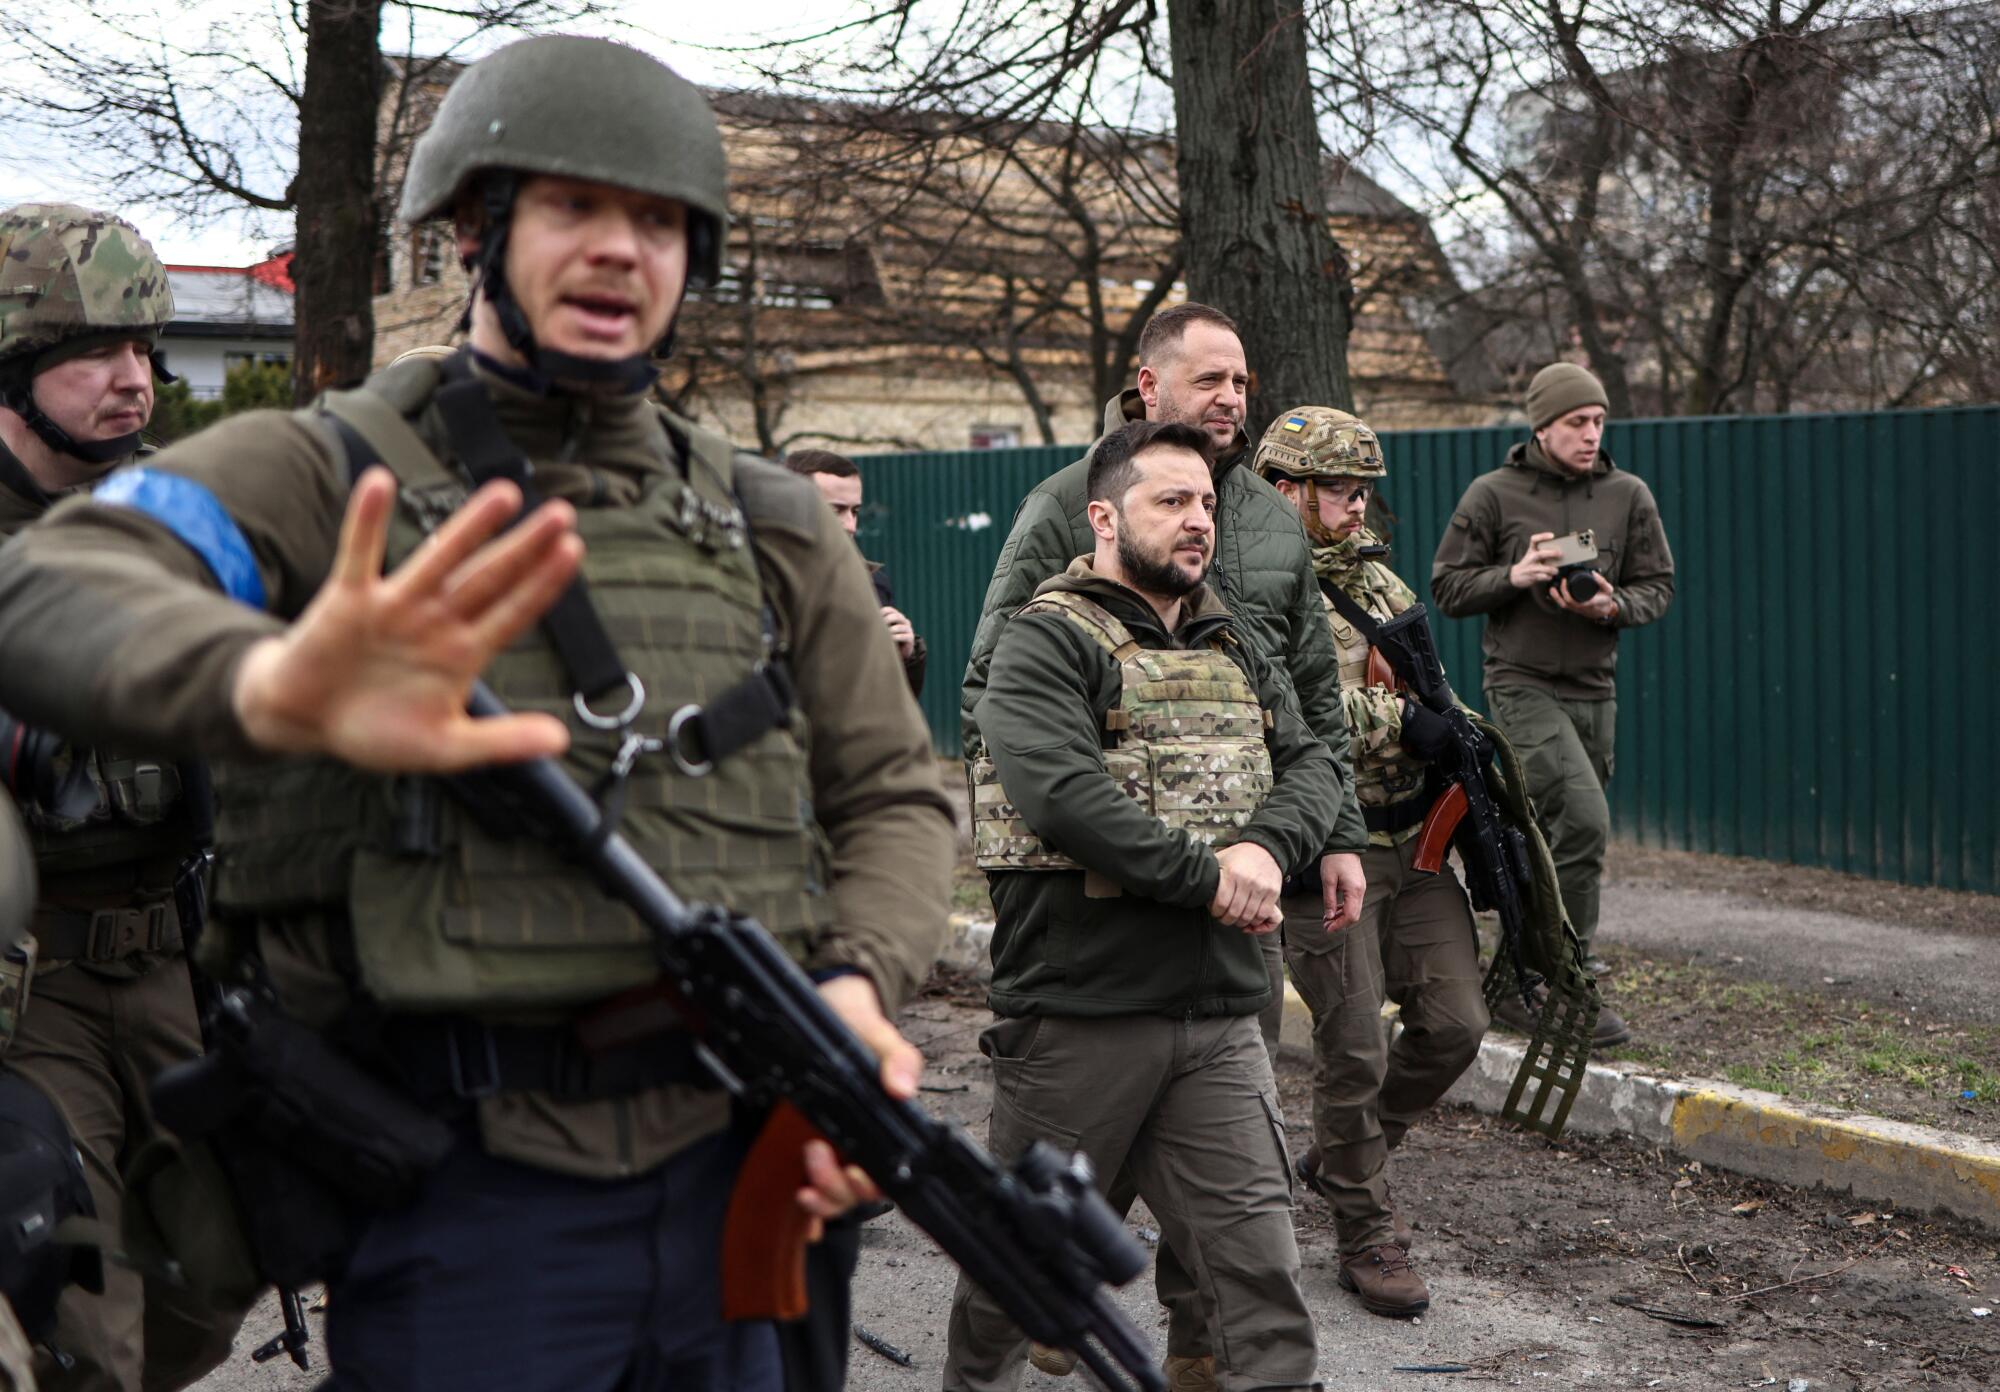 President Volodymyr Zelensky walks in the town of Bucha surrounded by other men with weapons.